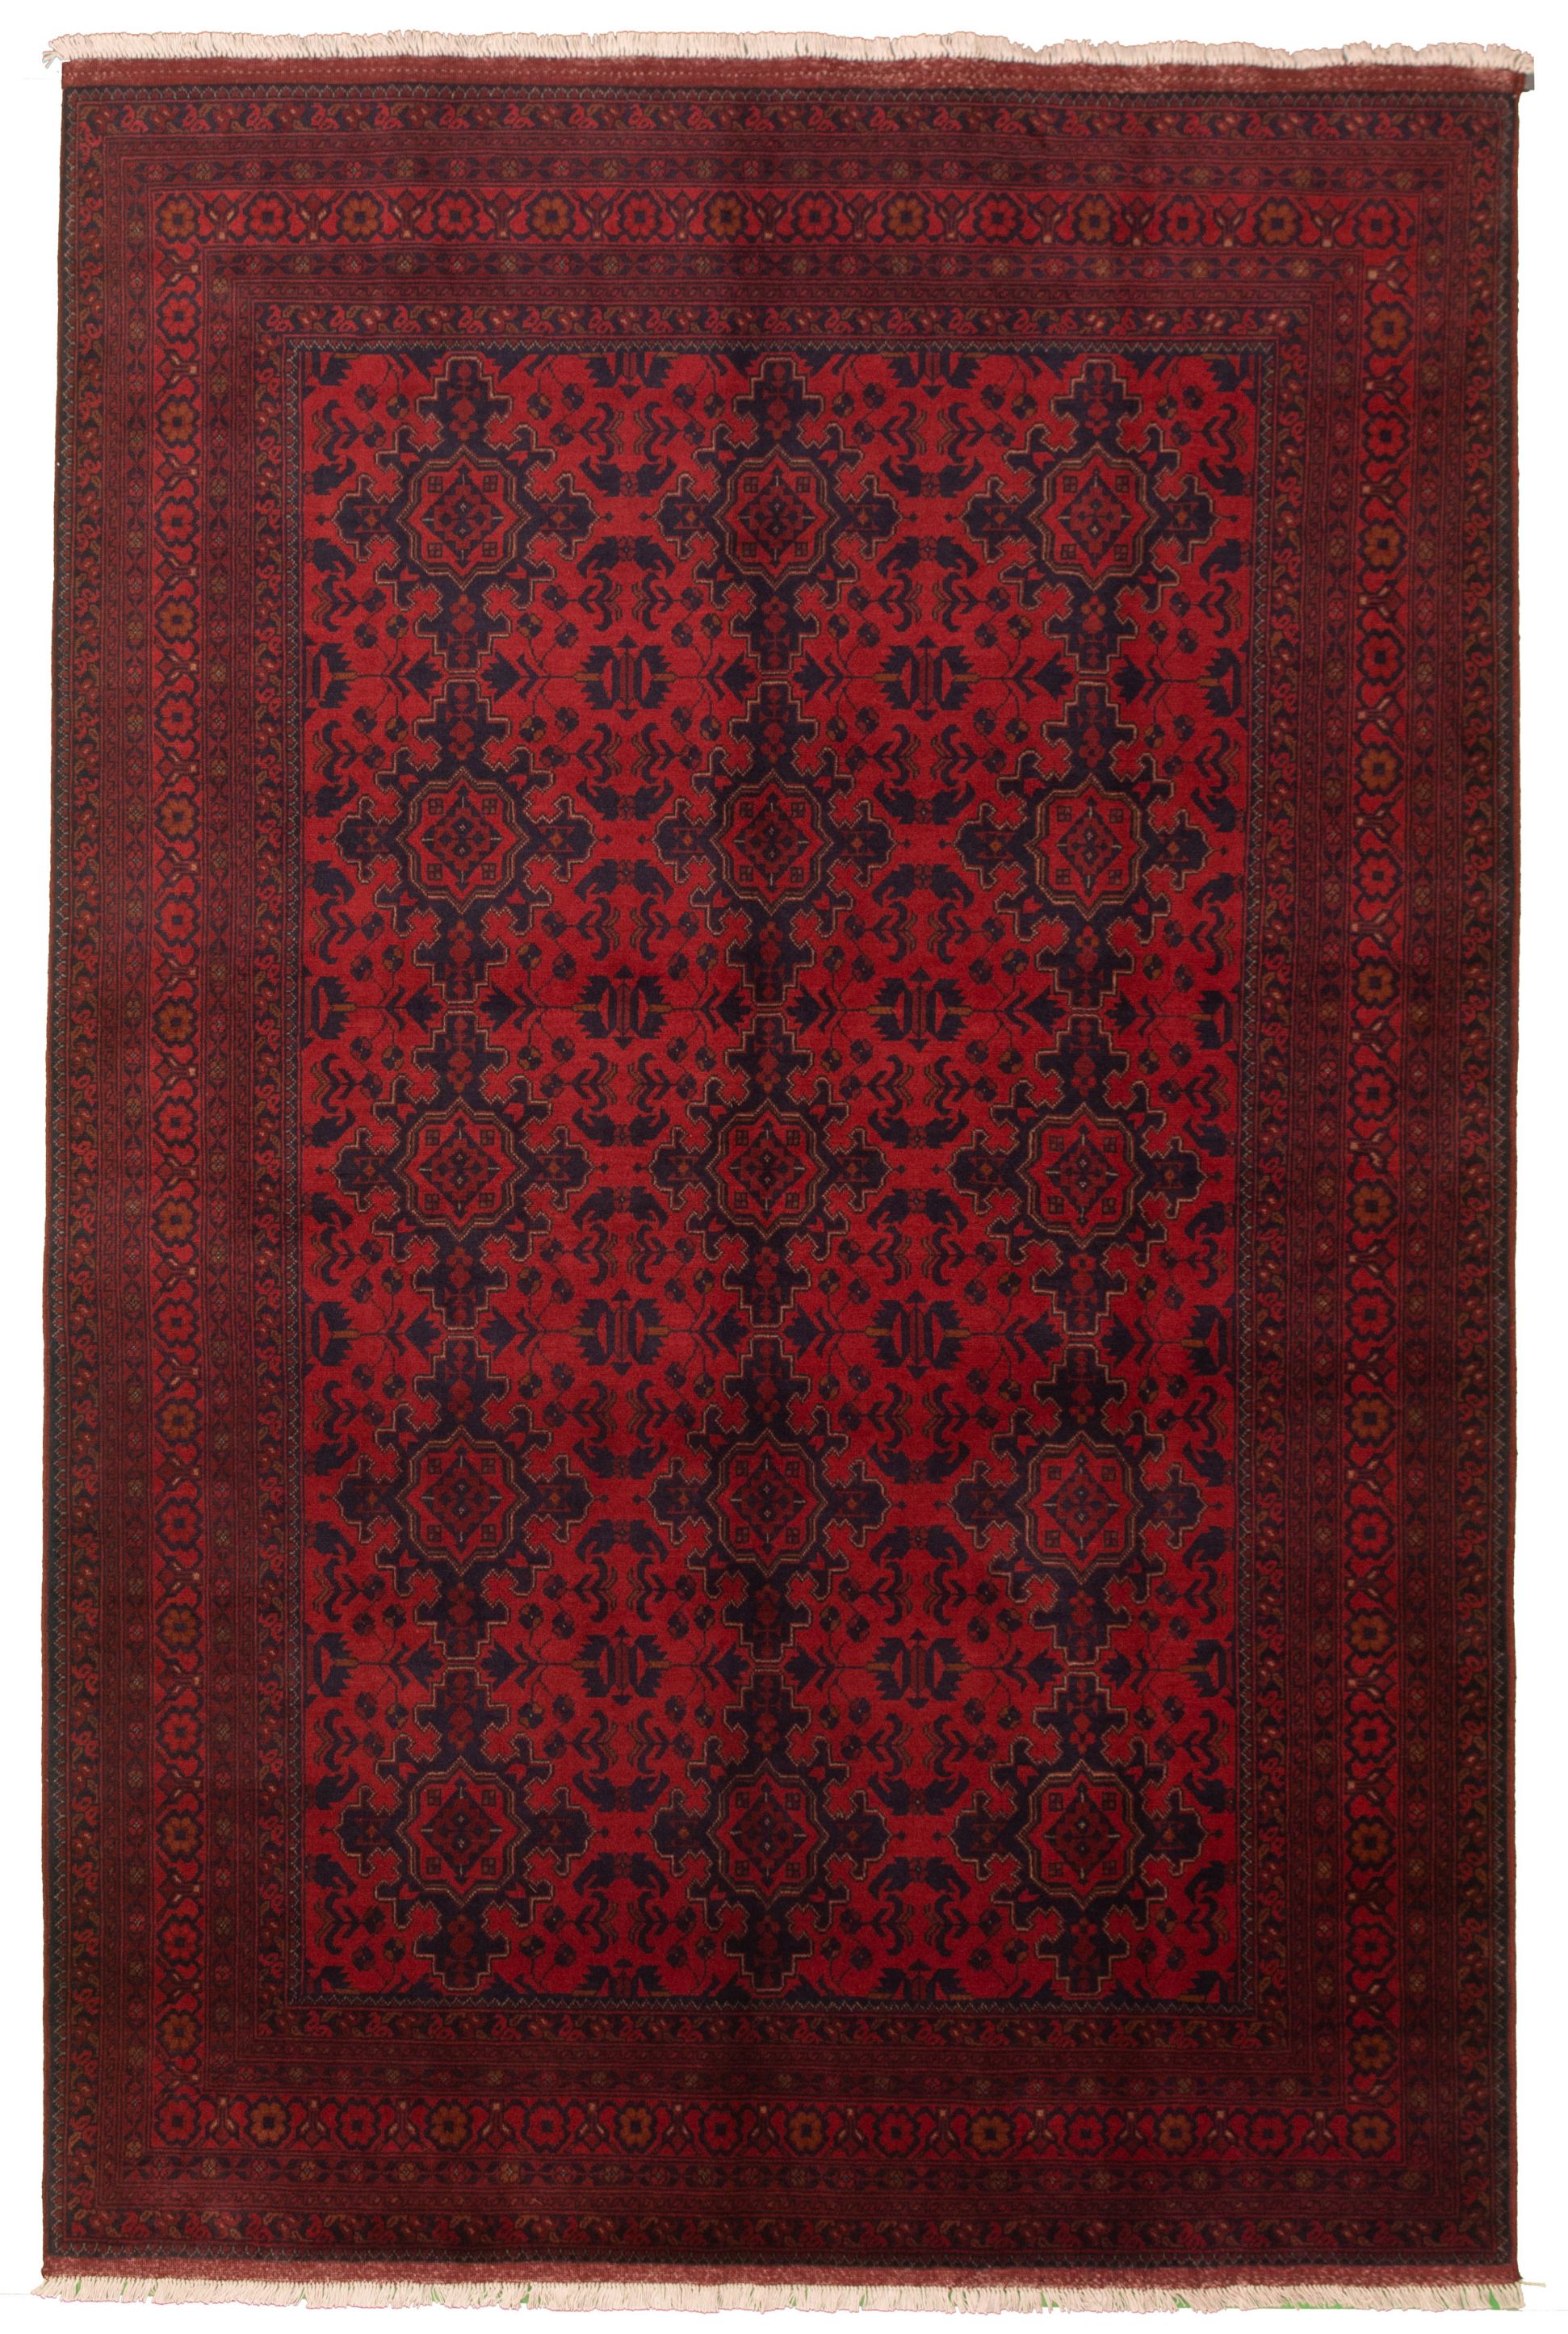 Hand-knotted Finest Khal Mohammadi Red Wool Rug 6'8" x 9'10"  Size: 6'8" x 9'10"  